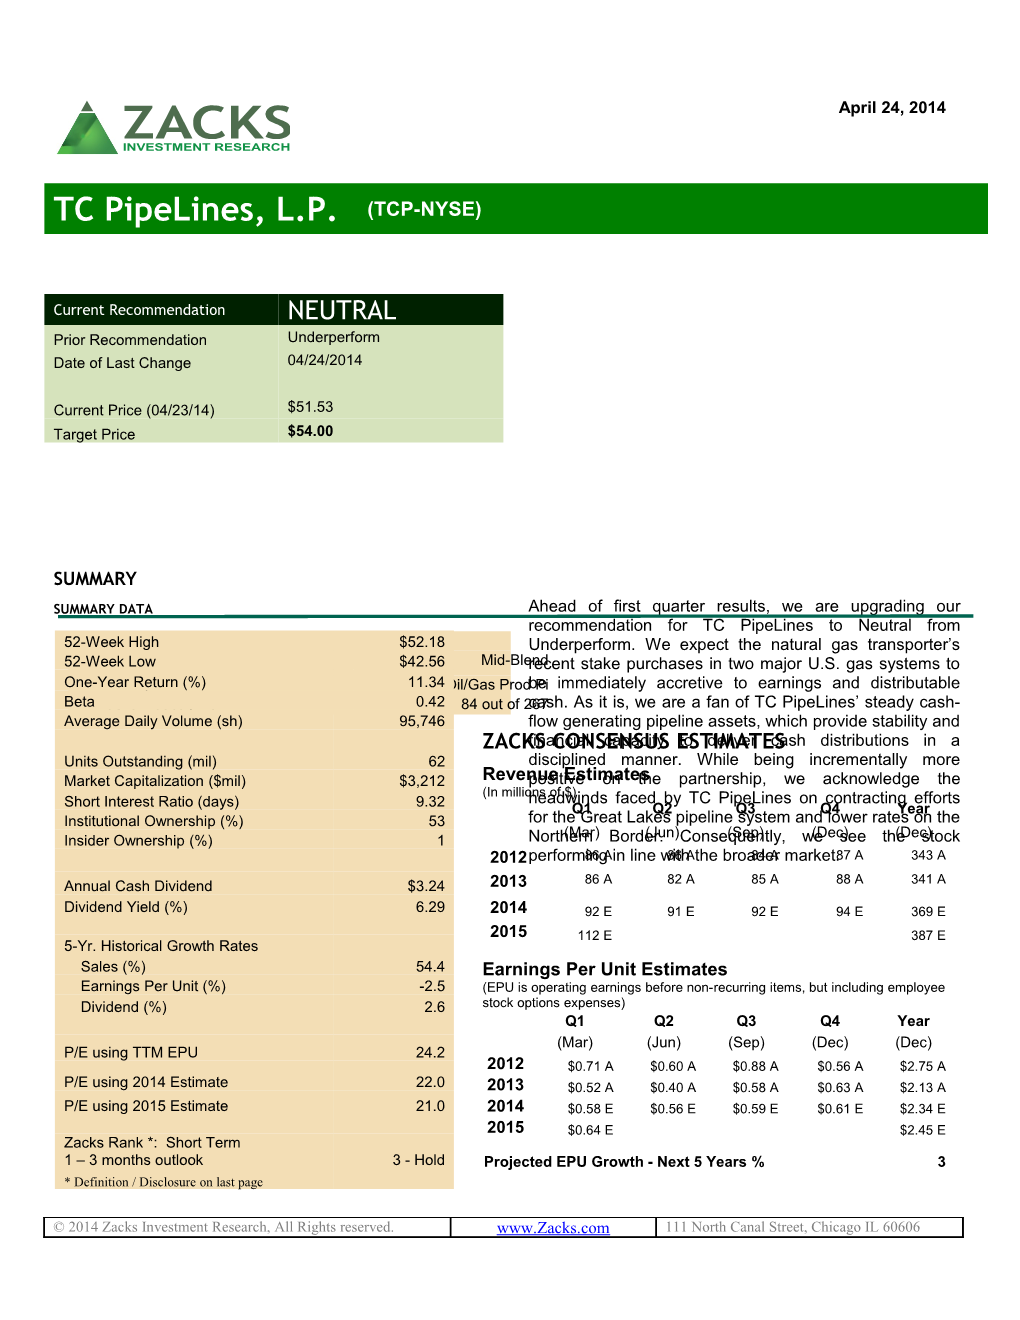 Calgary, Alberta-Based TC Pipelines, L.P. (TCP) Is a Master Limited Partnership (MLP)